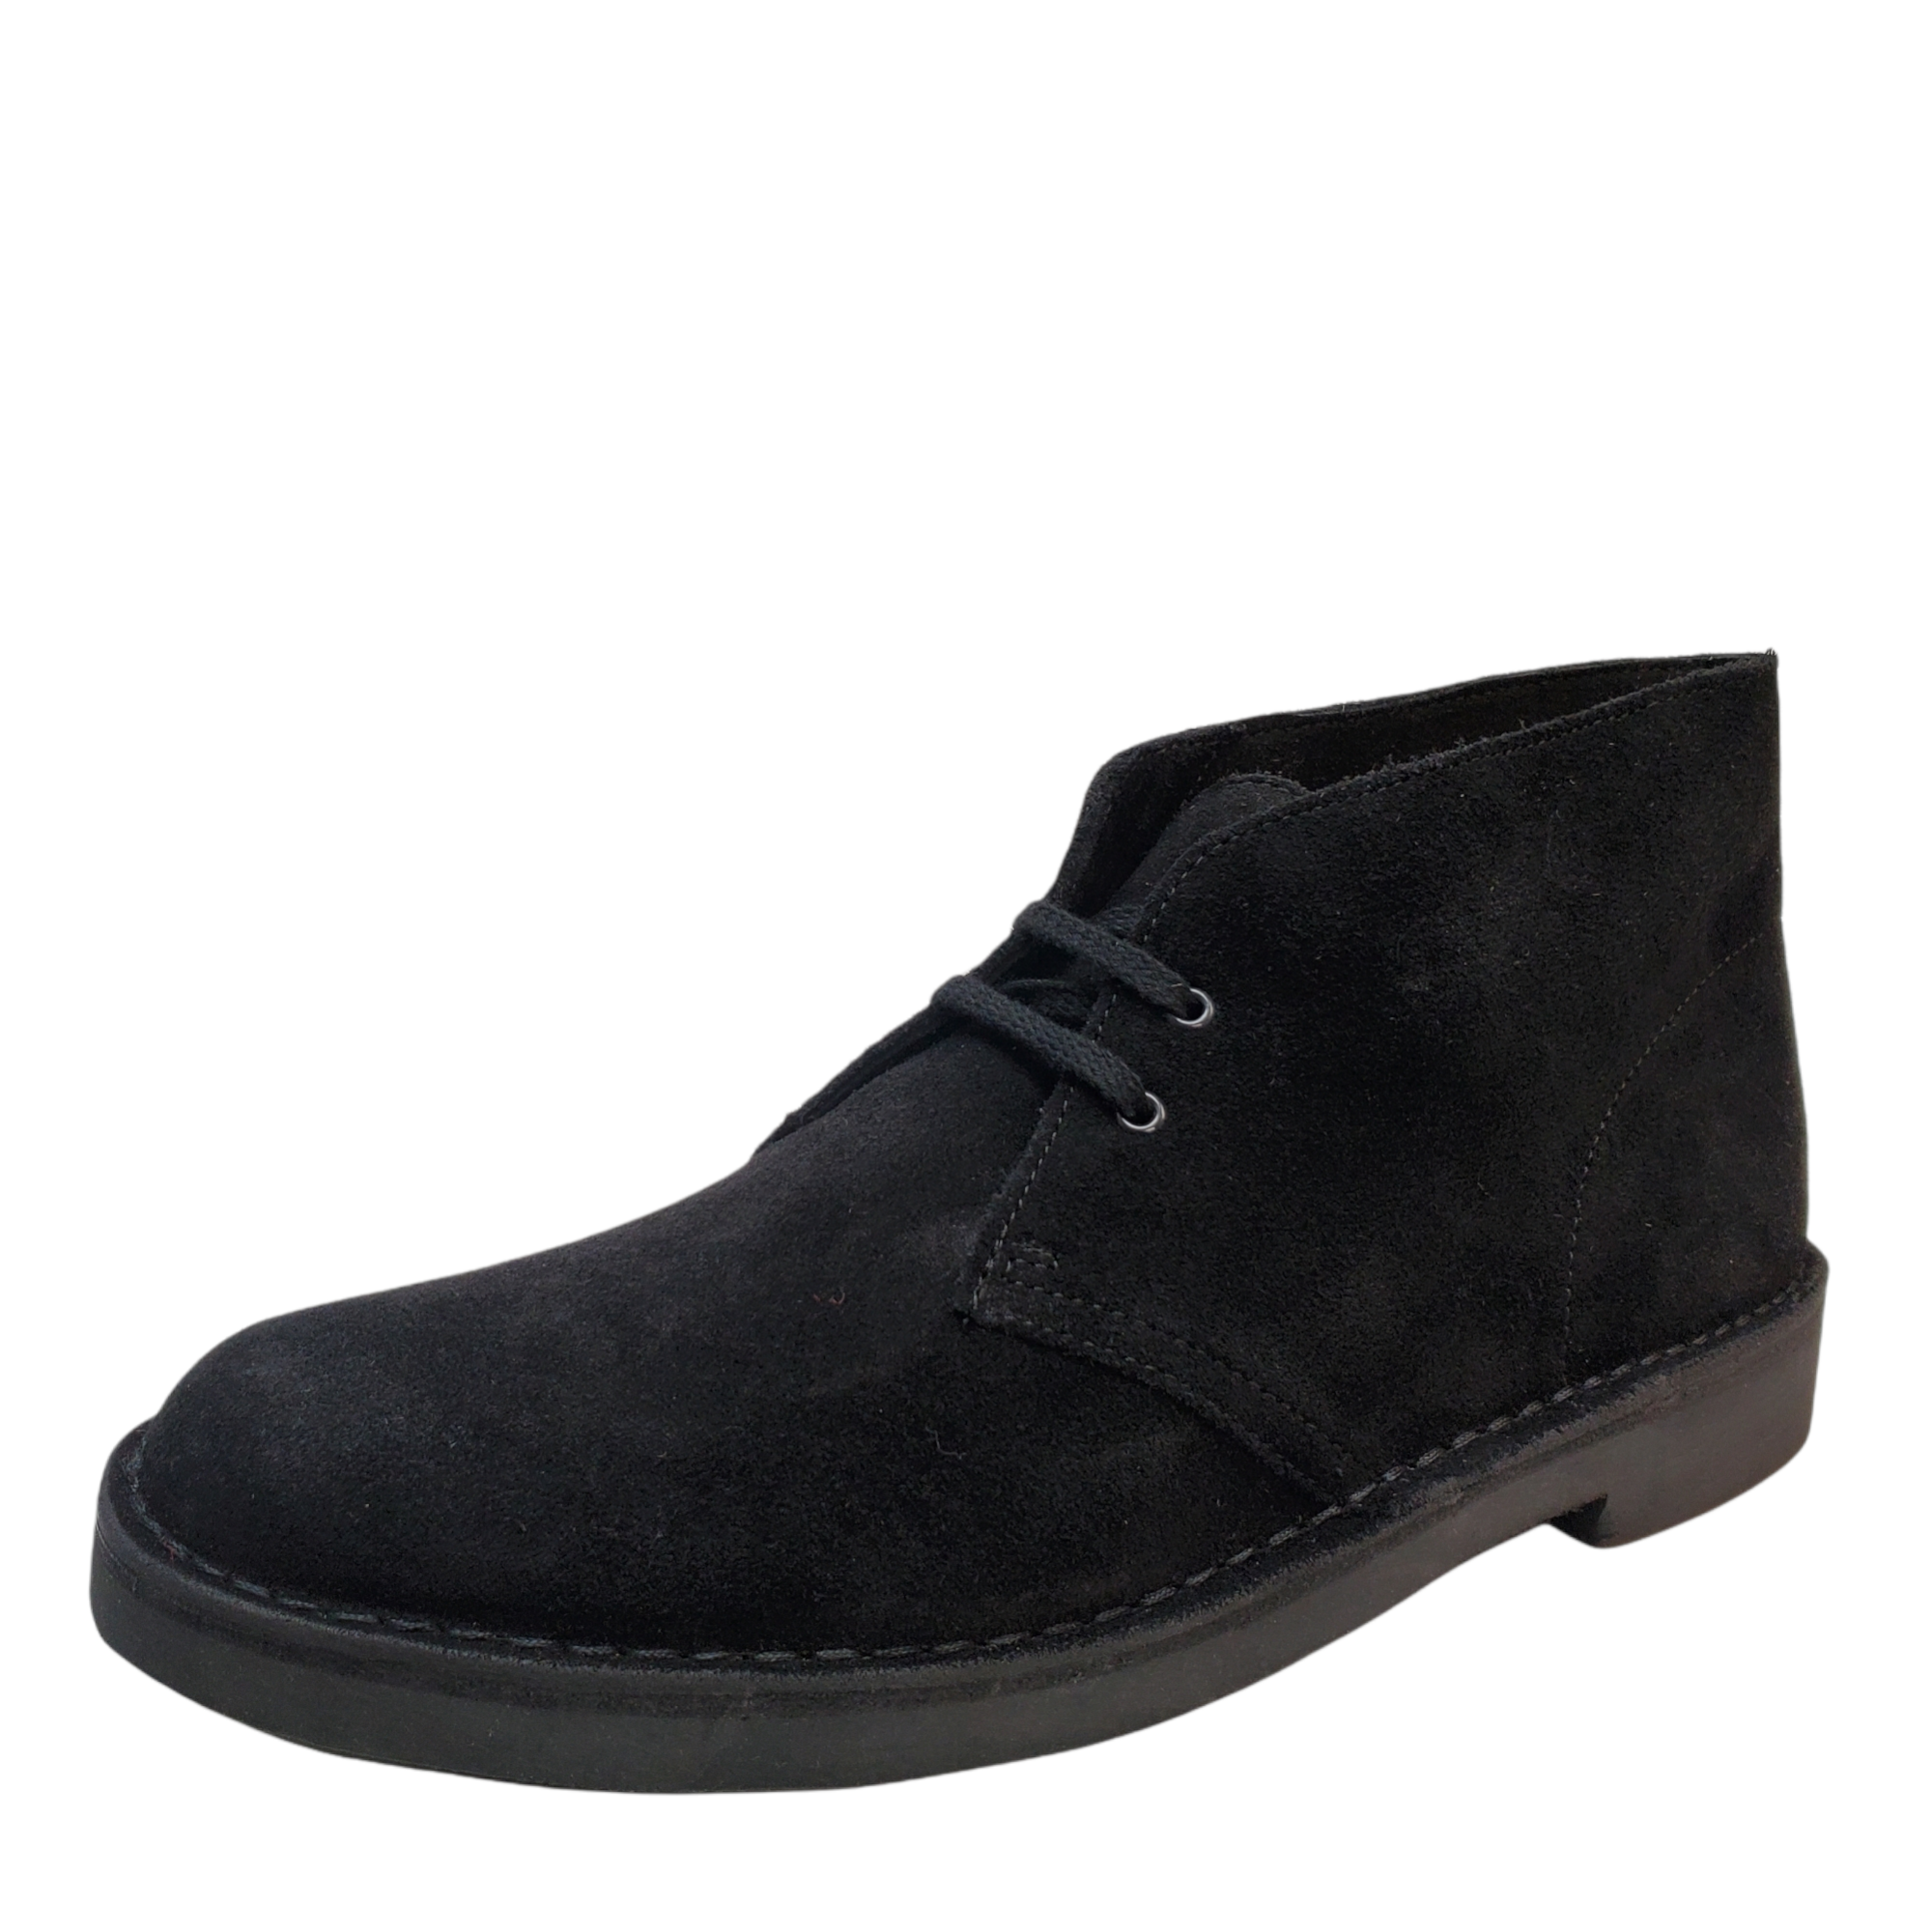 Mens Suede Leather Chukka boots Bushacre 2 Lace Up Shoes Aubergine 8M Affordable Designer Brands | Affordable Designer Brands